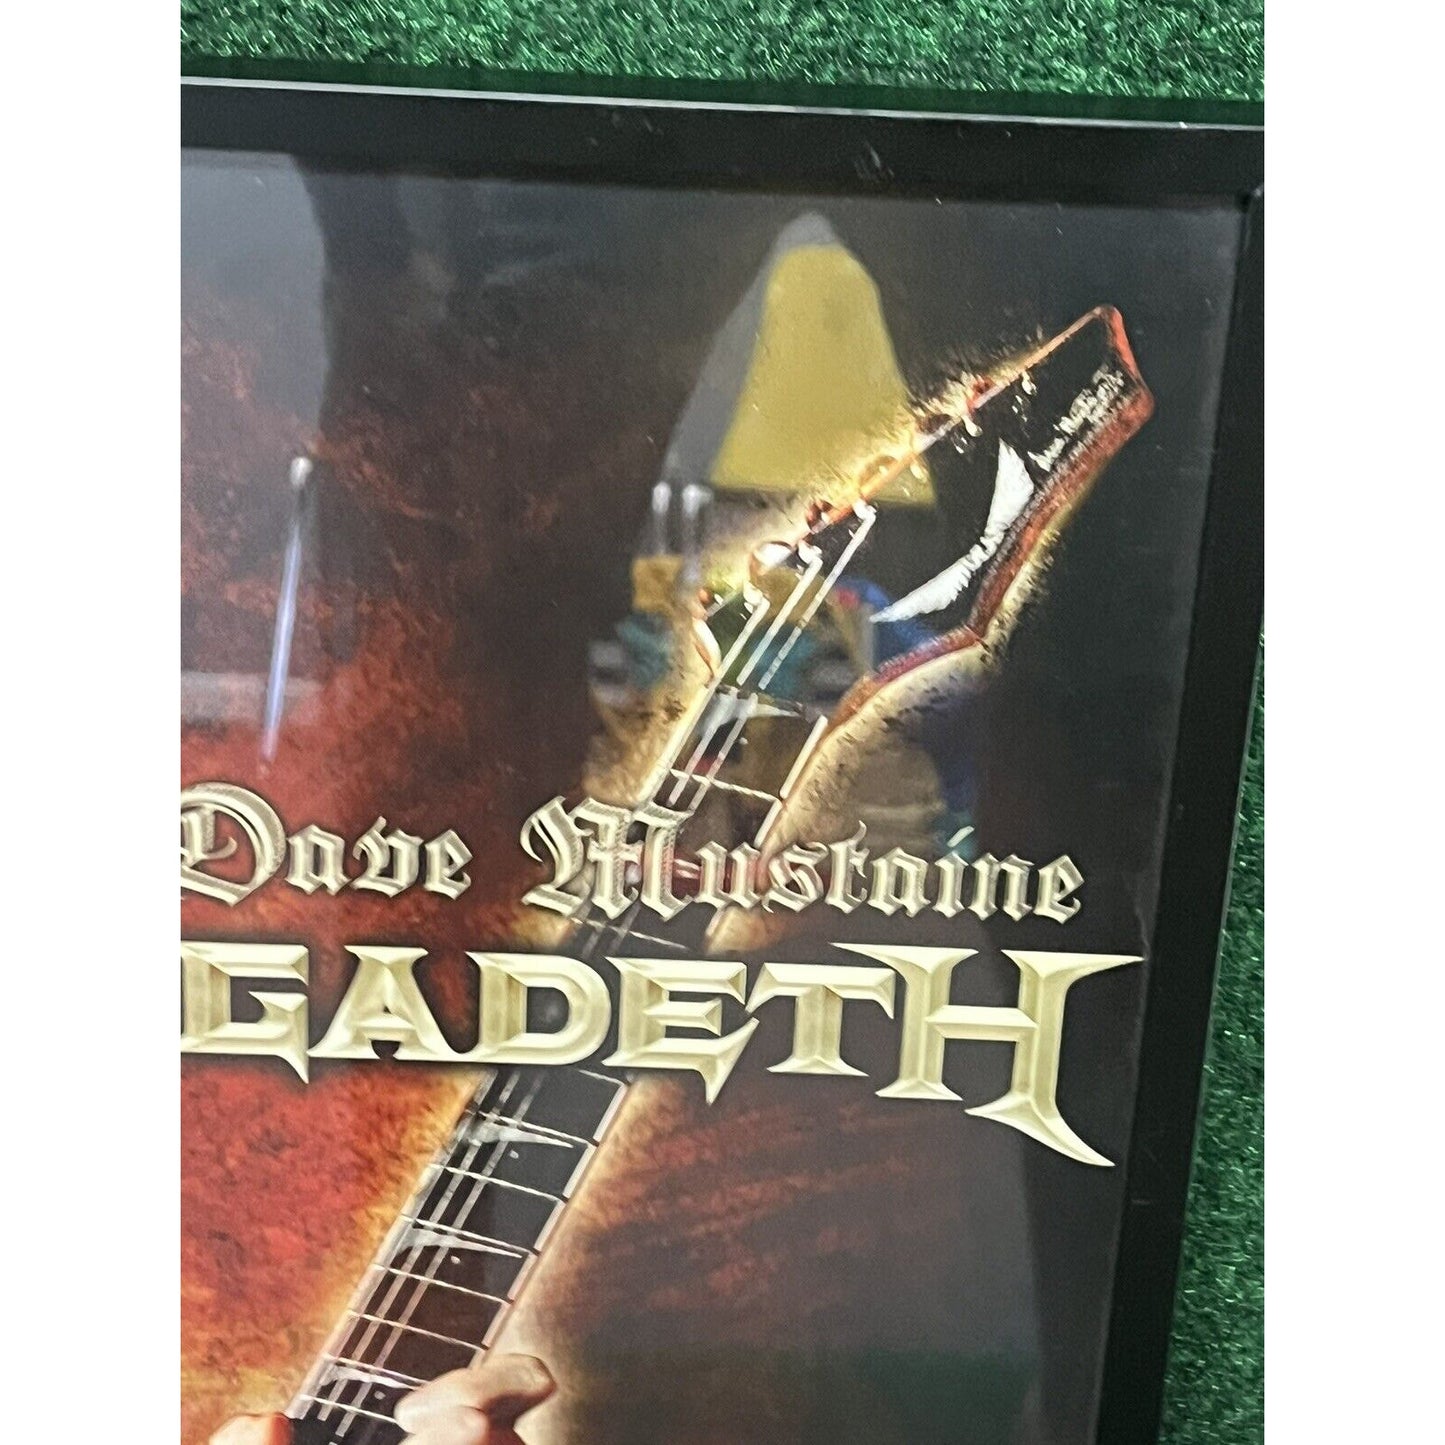 Megadeth *Dave Mustaine* Guitar Store Promo Framed Print/Poster